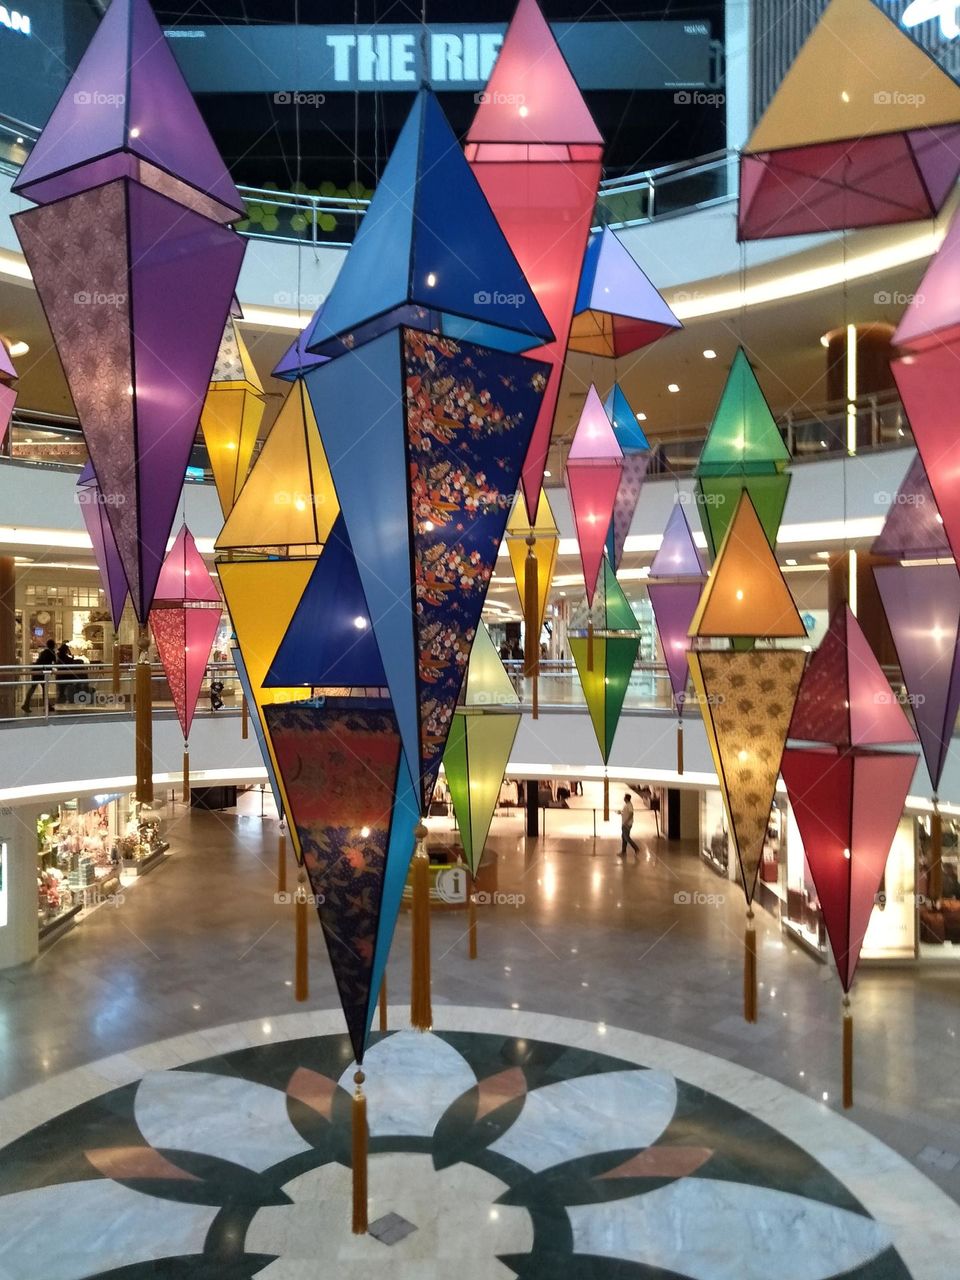 Colourful lanterns in the mall.